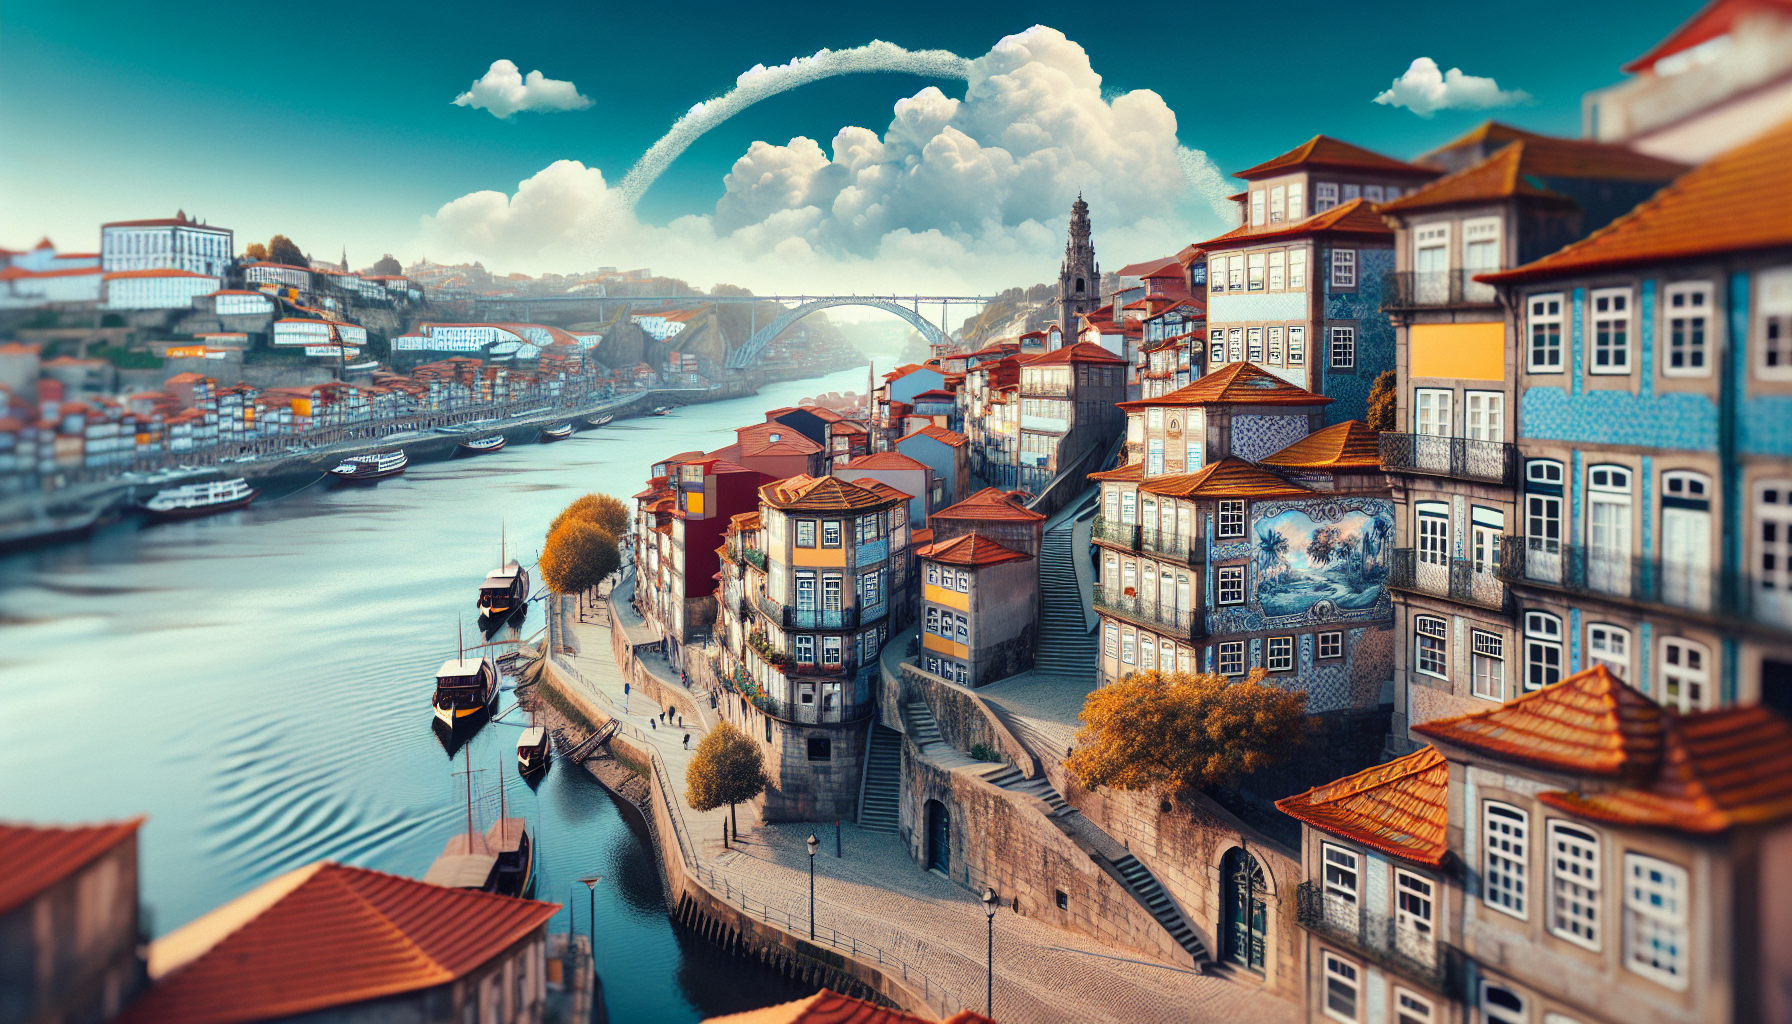 explore the best places to visit in europe and discover the charming city of porto, portugal with its rich history, stunning architecture, and vibrant atmosphere.